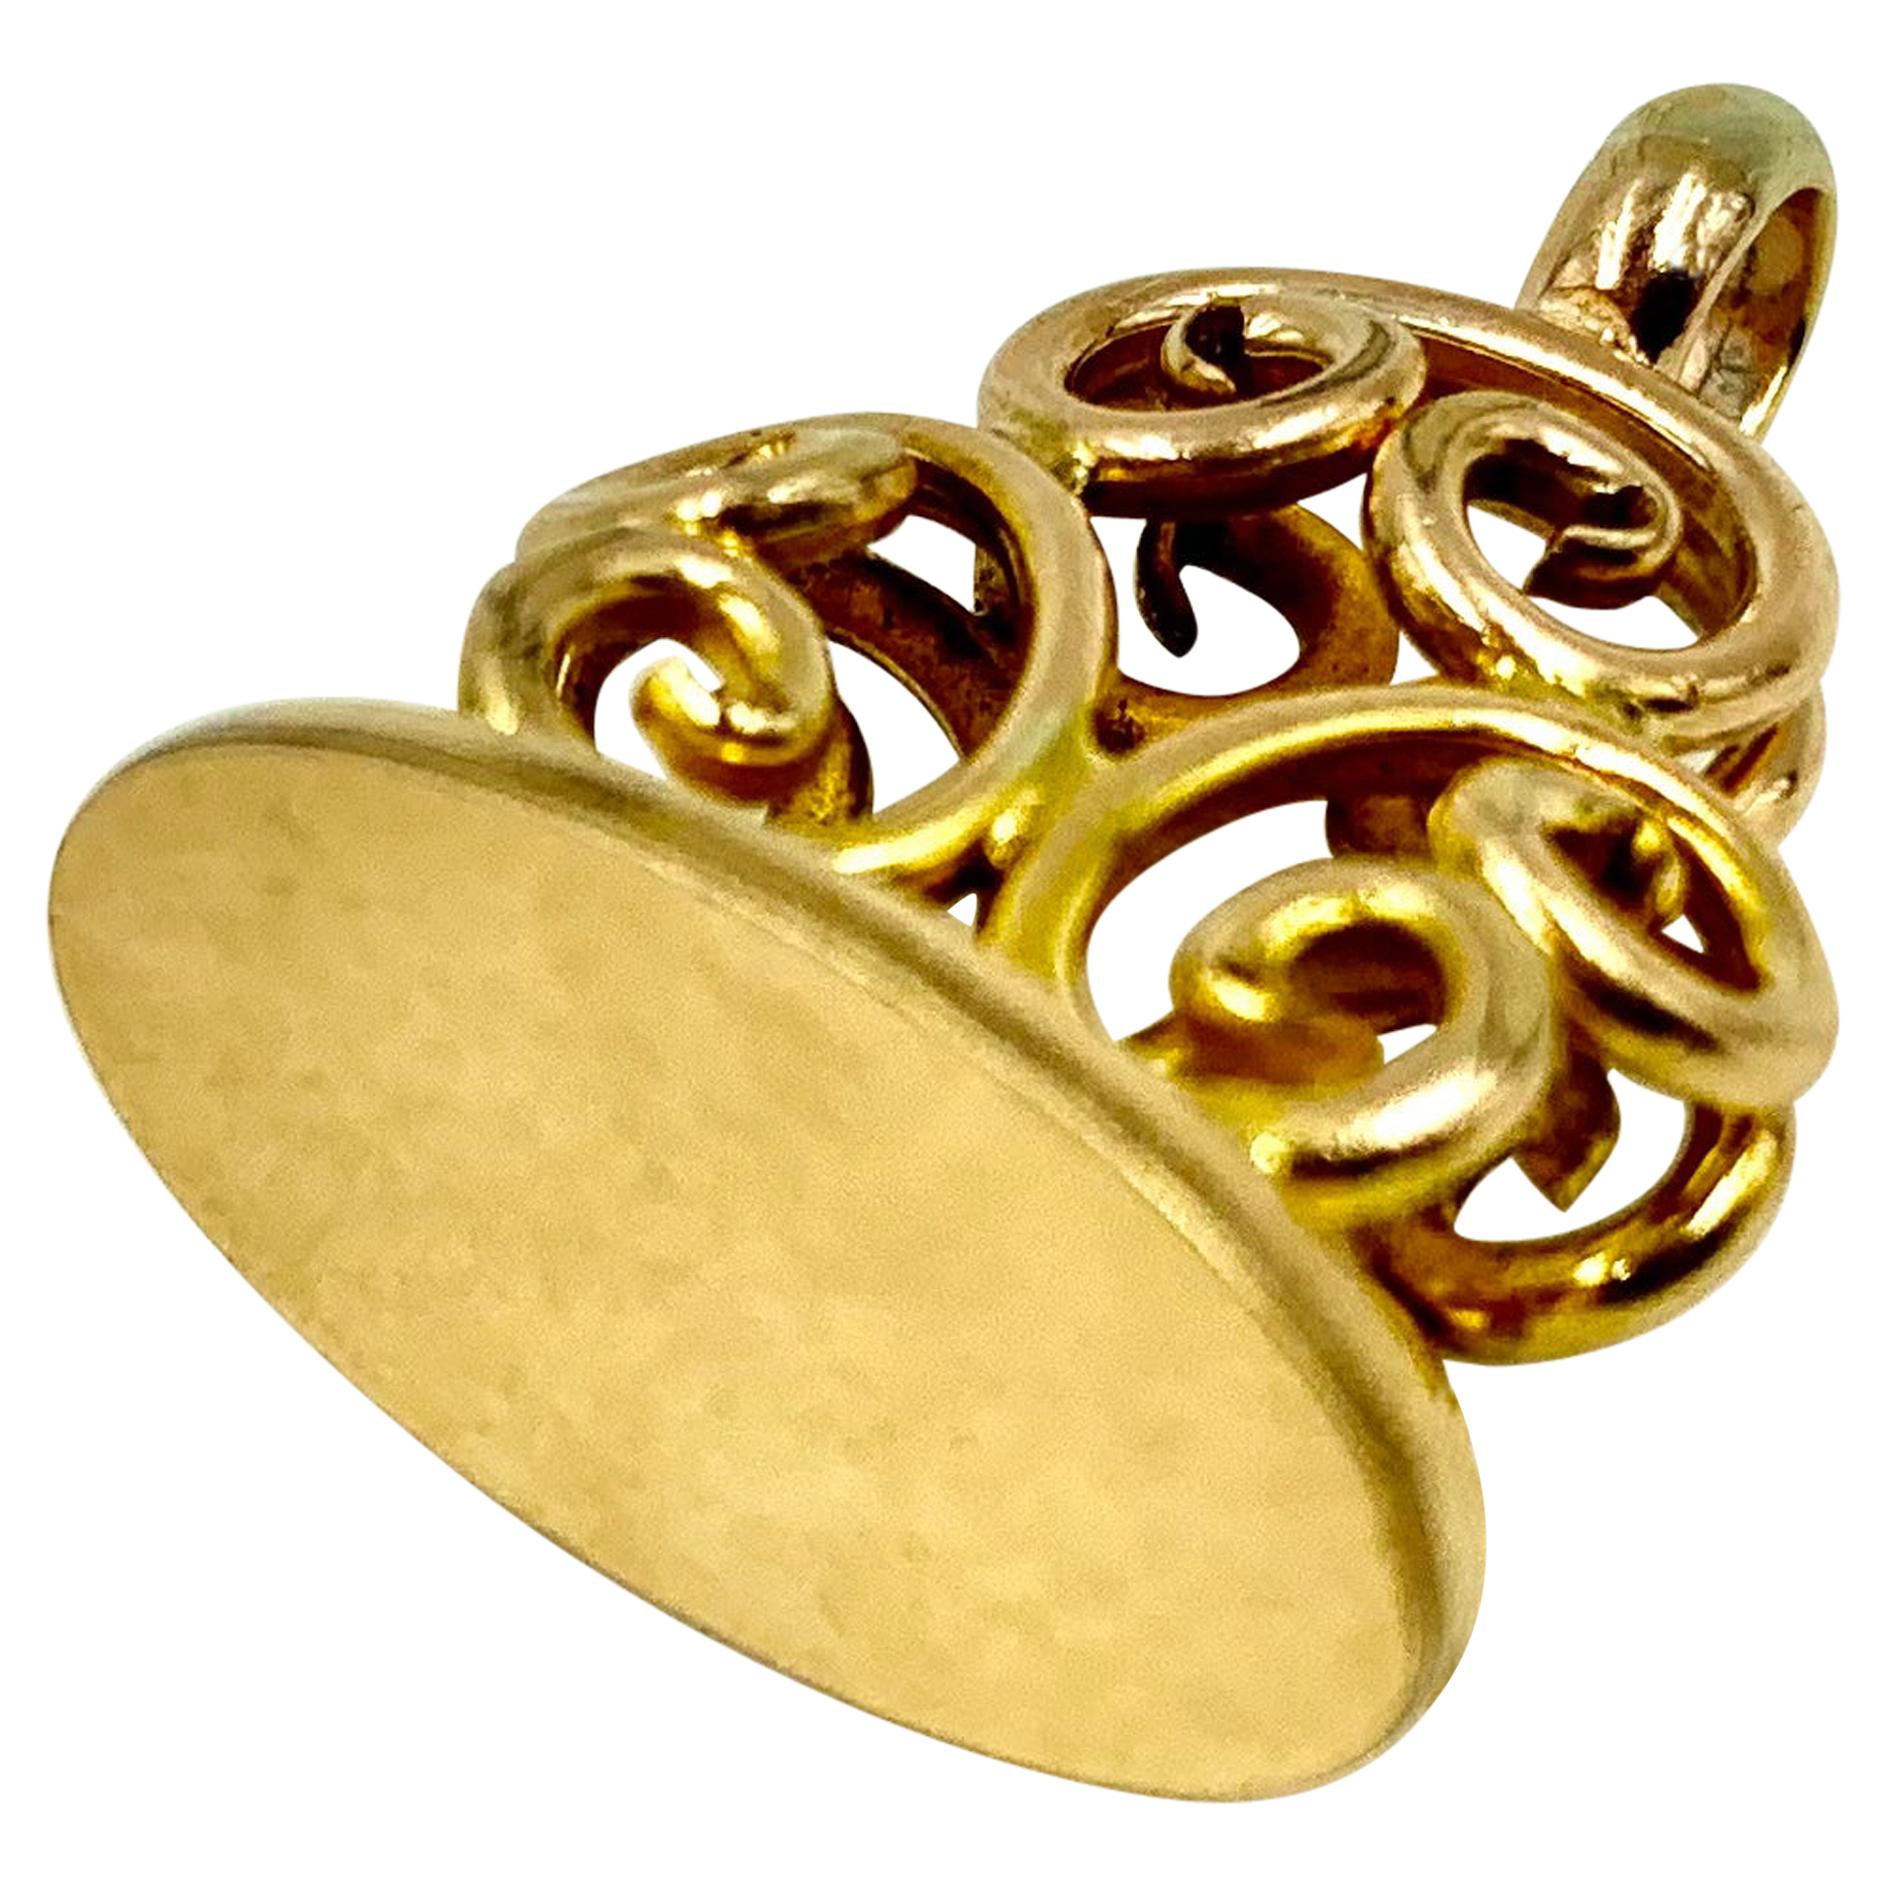 Beautiful antique Edwardian 14K yellow gold scroll motif signet seal pendant, wonderful for personalization. 
Each side composed of three connected C scrolls with an elegant oval seal platform, topped with a generous oval bail. 
Late 19th